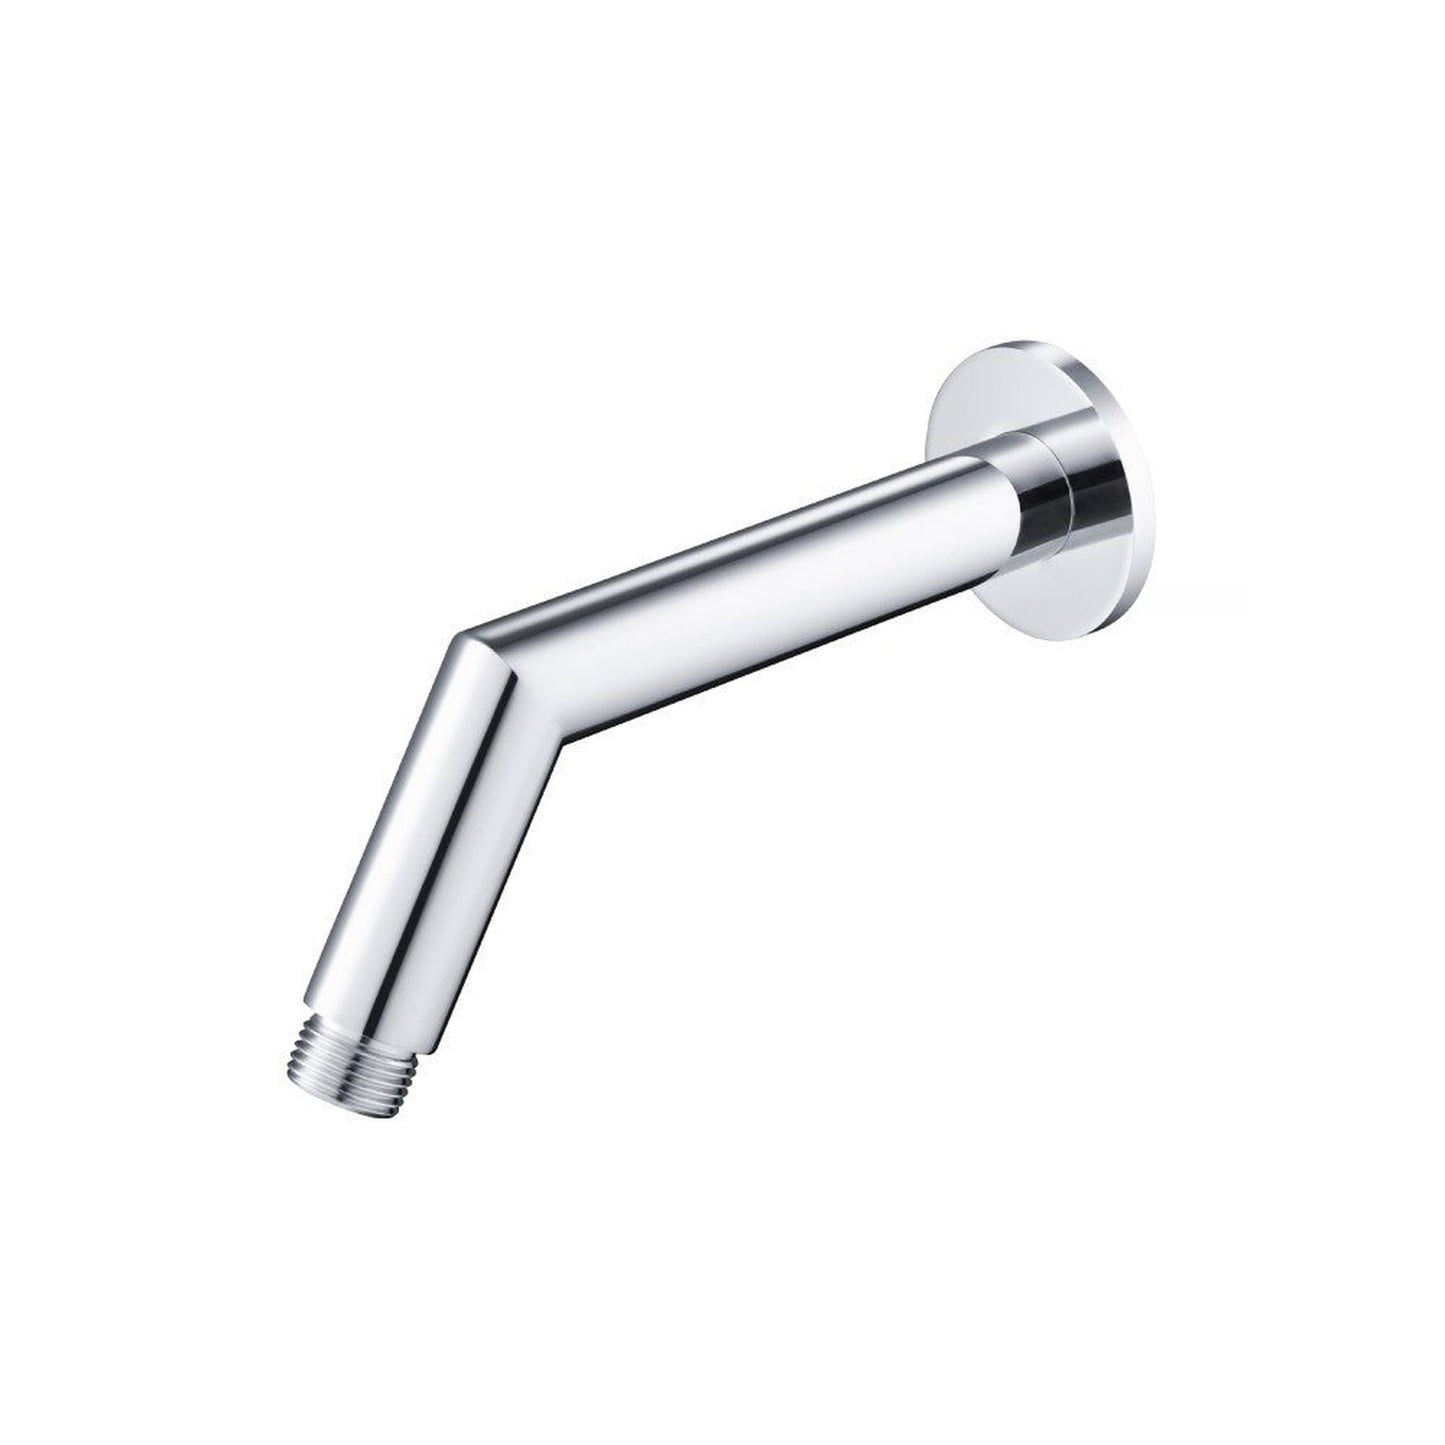 Isenberg Universal Fixtures 6" Chrome Solid Brass Wall-Mounted Standard Shower Arm With Square Sliding Flange